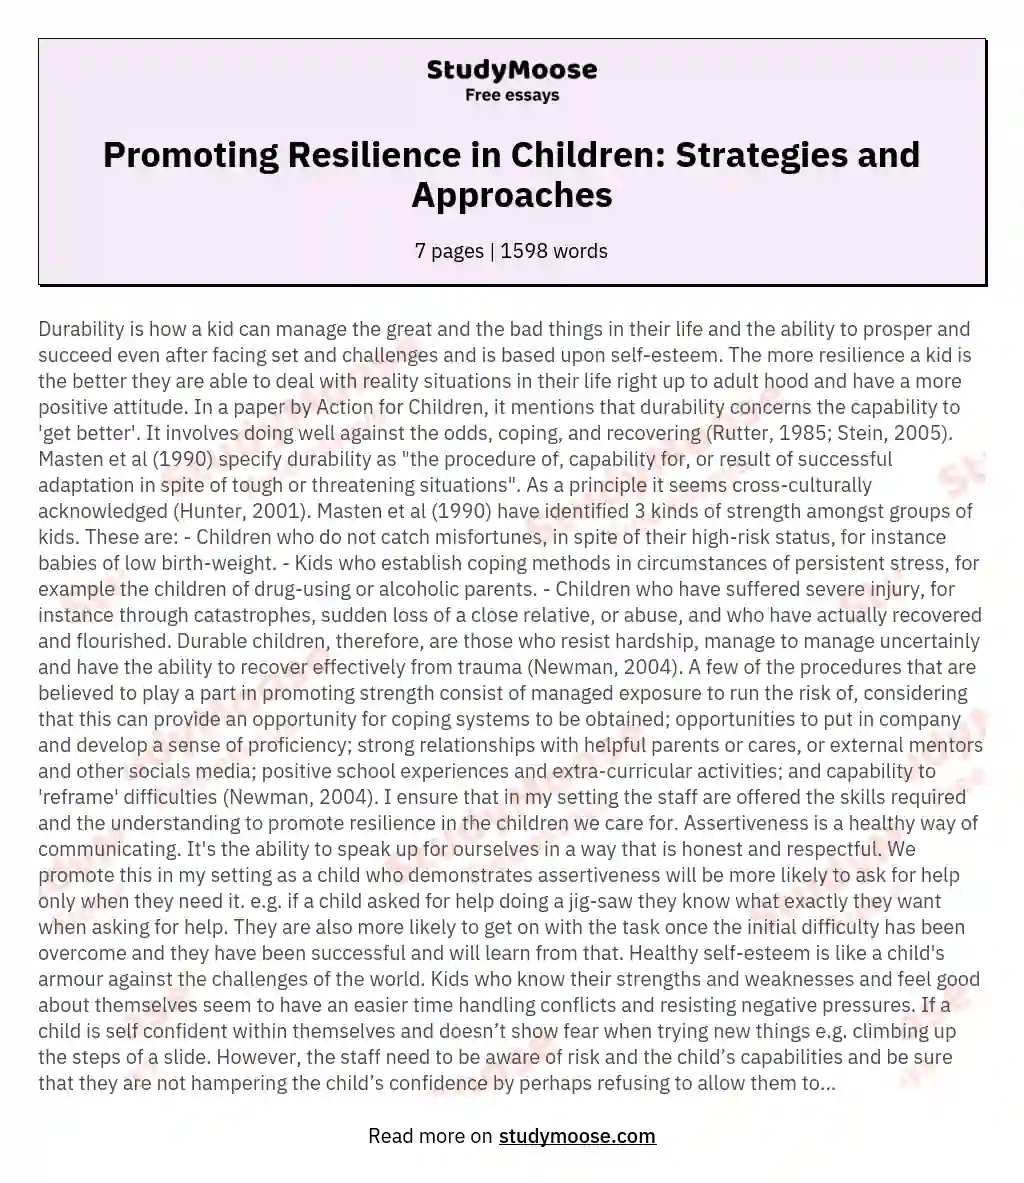 Promoting Resilience in Children: Strategies and Approaches essay